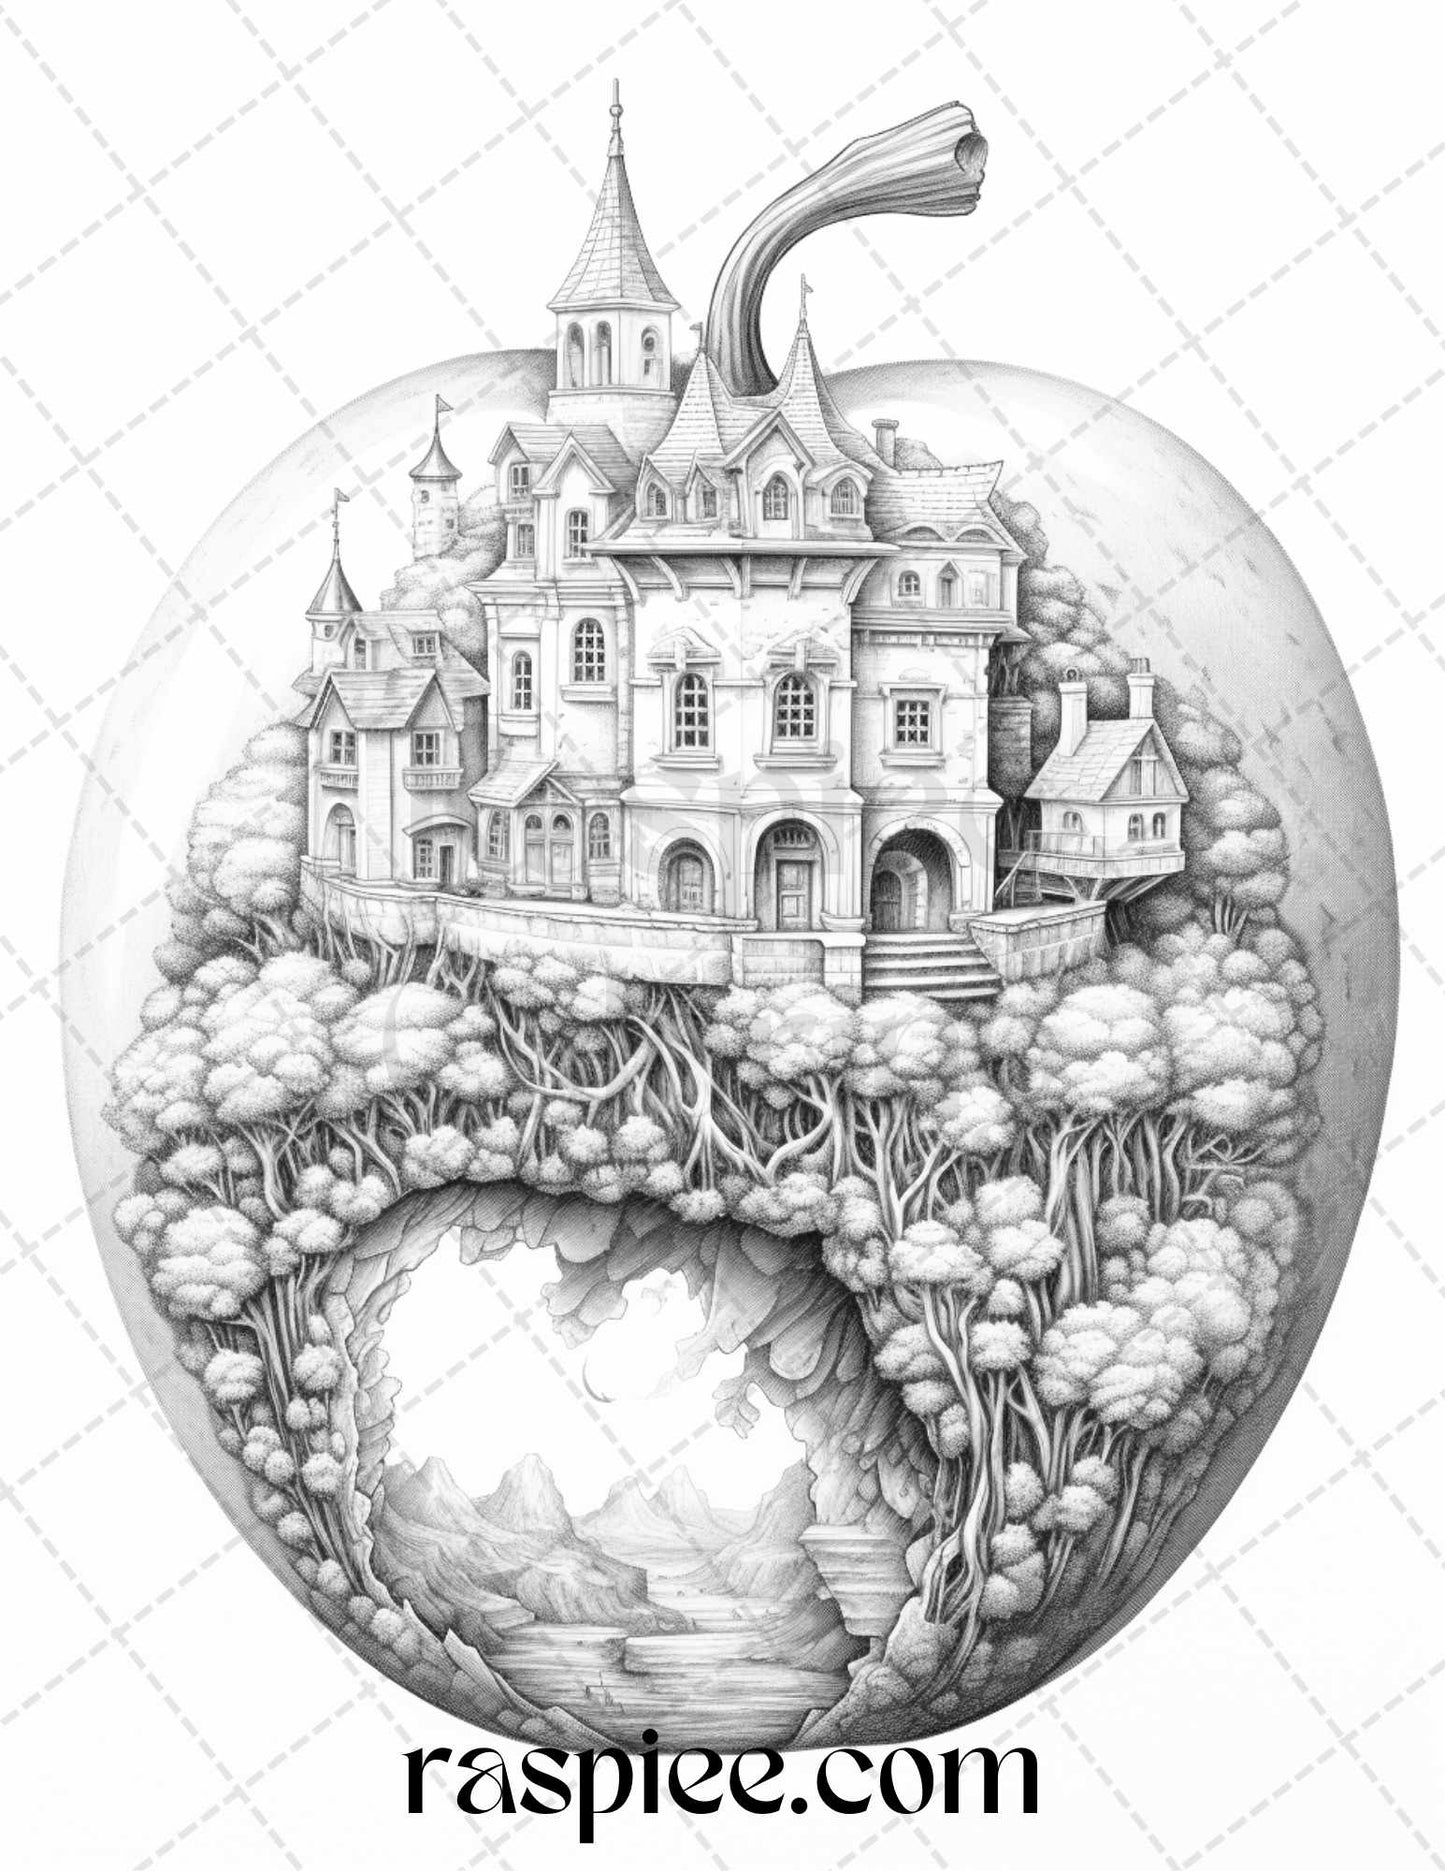 60 Miniworld in the Apple Grayscale Coloring Pages Printable for Adults, PDF File Instant Download